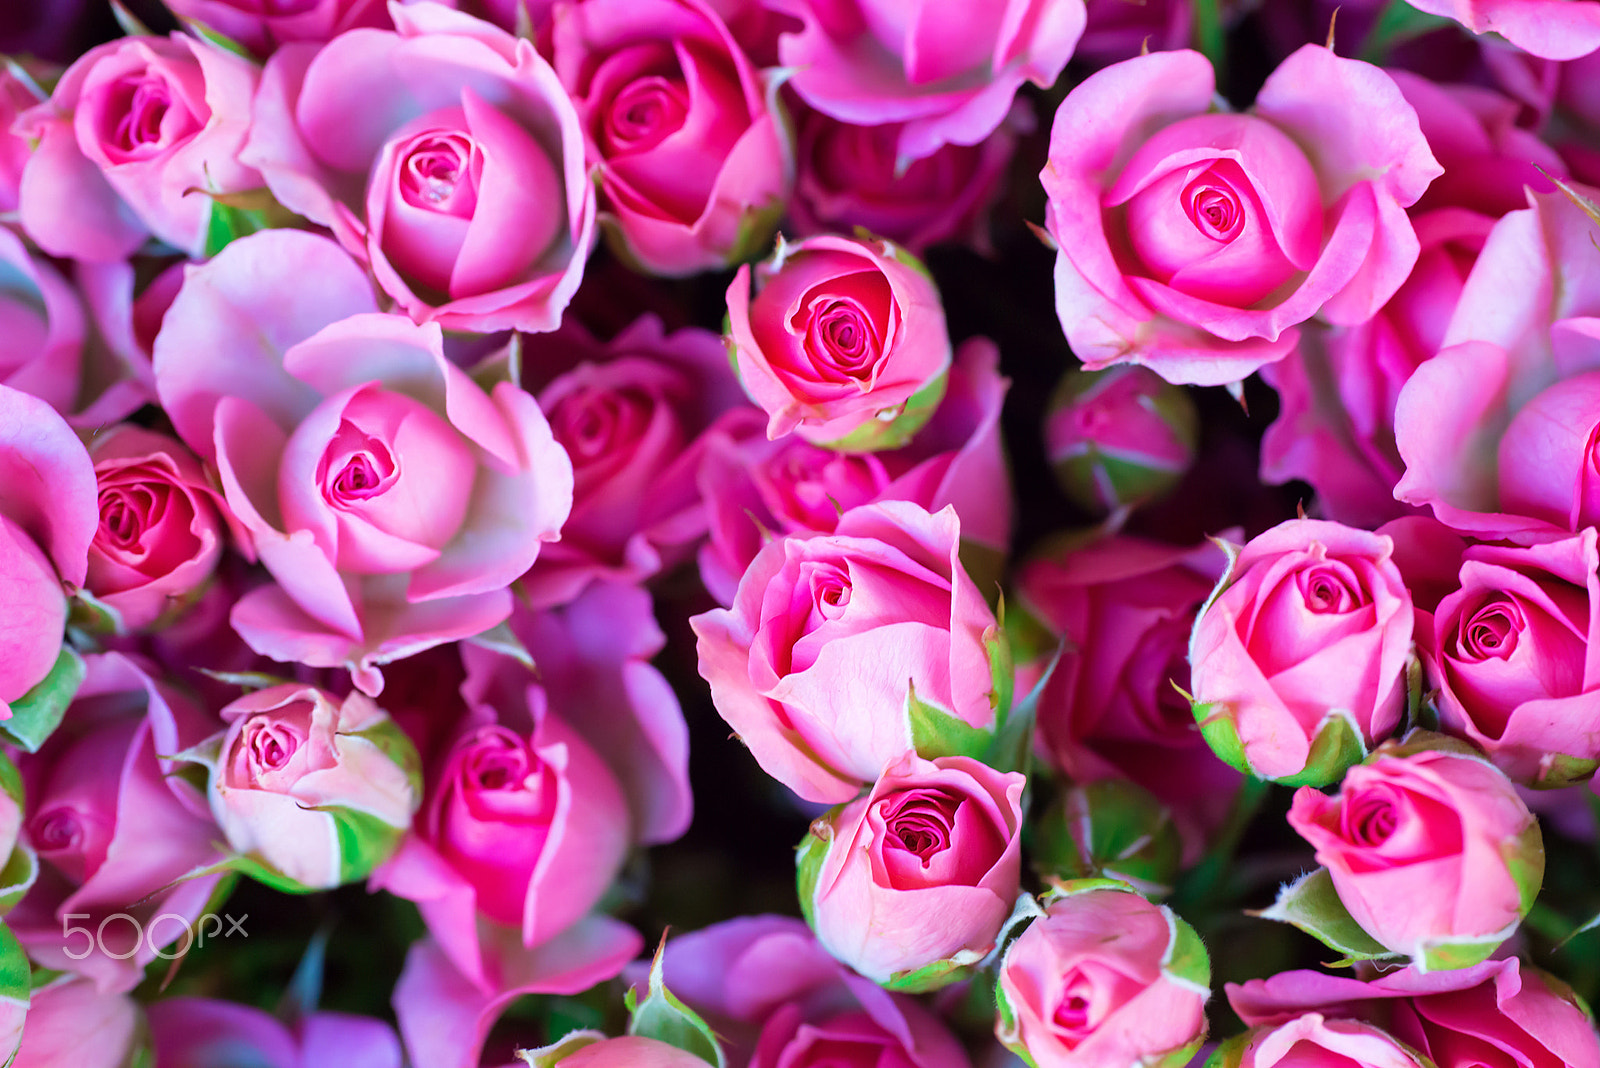 Nikon D800 + Sigma 70mm F2.8 EX DG Macro sample photo. Fresh pink roses with green leaves photography